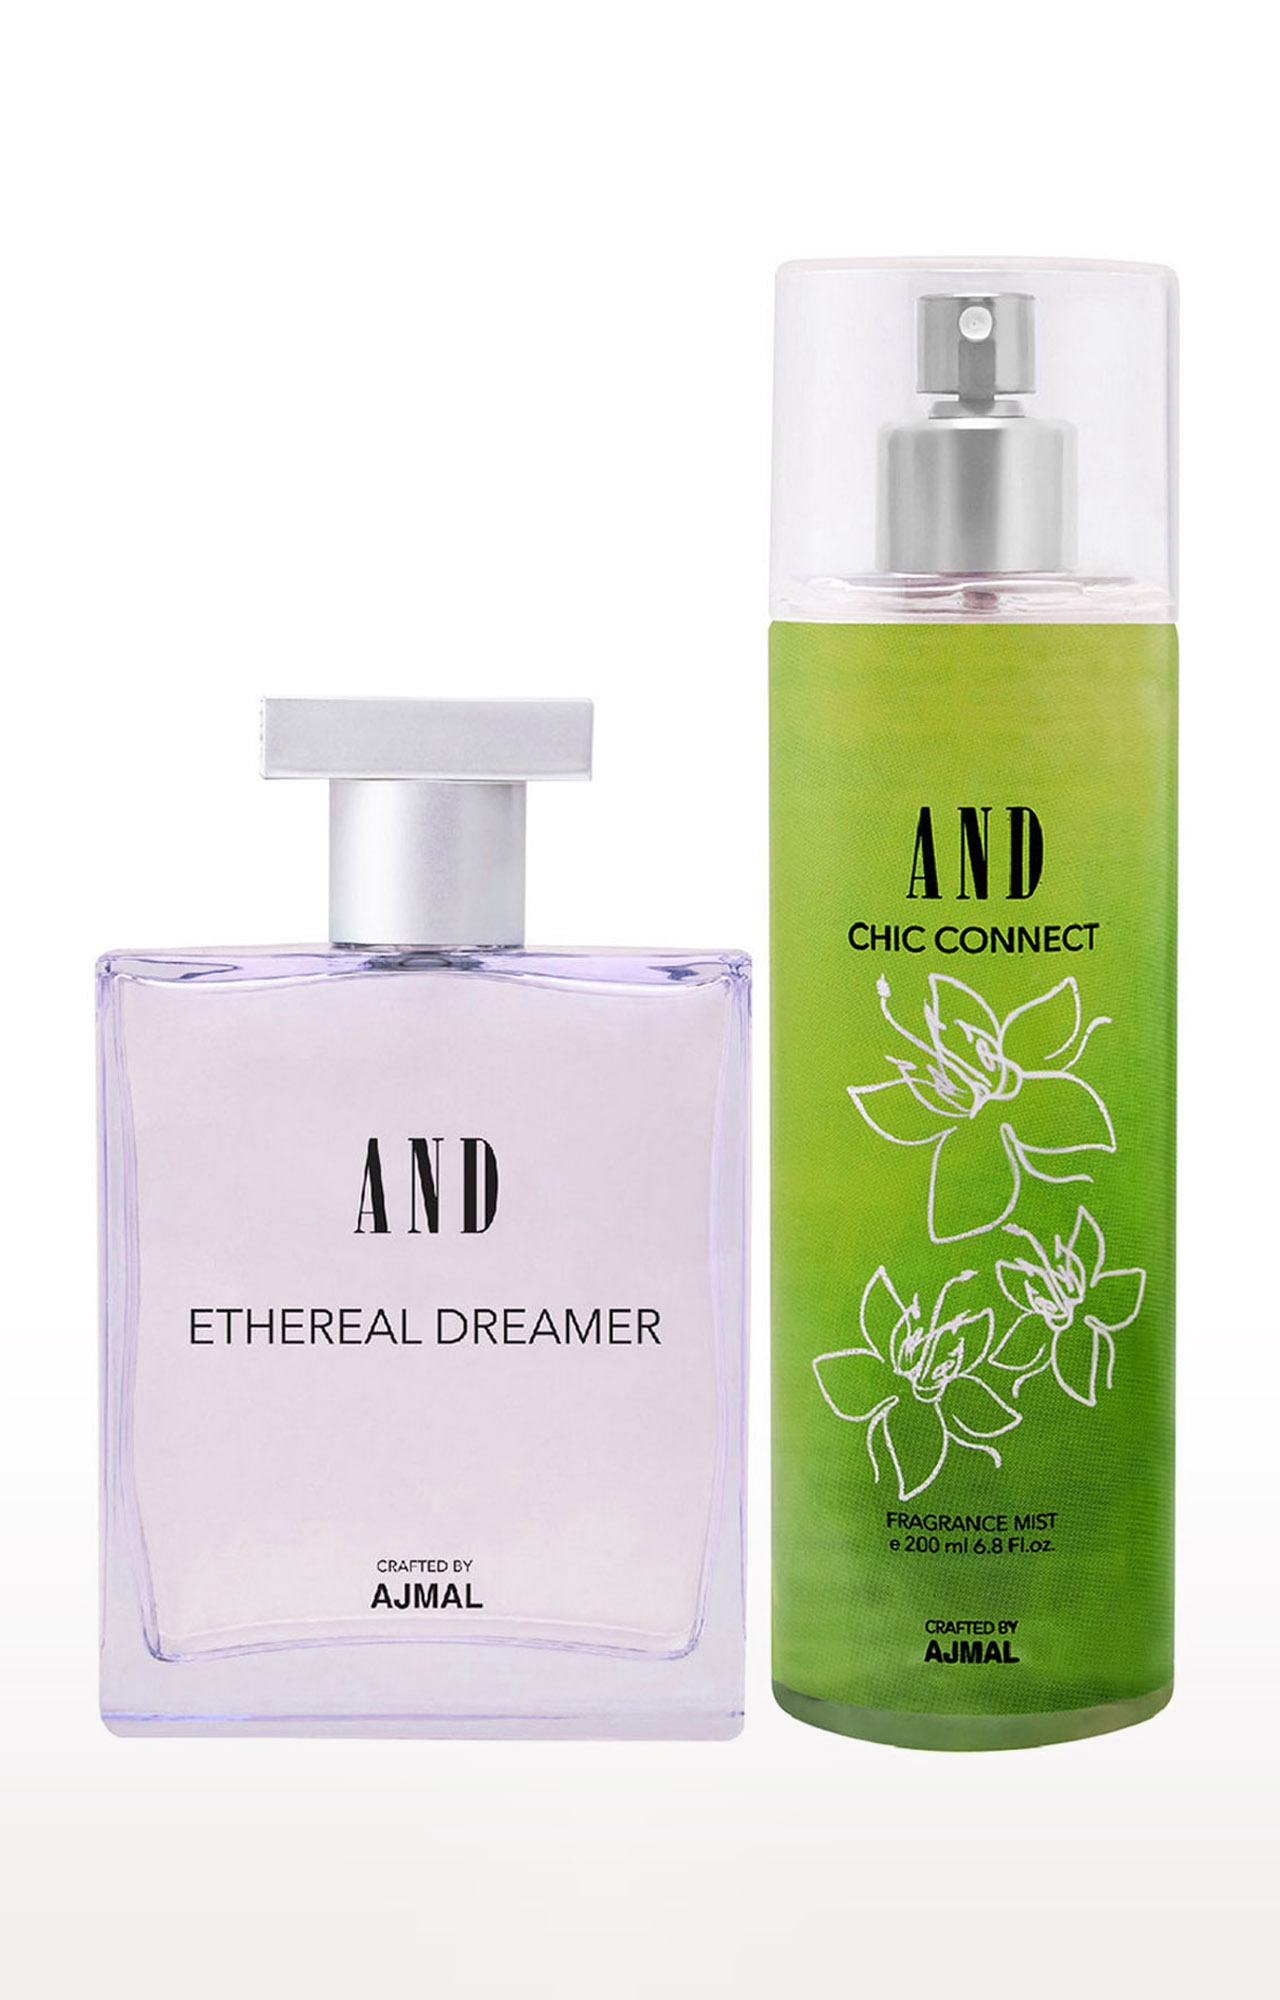 AND Crafted By Ajmal | AND Ethereal Dreamer Eau De Parfum 100ML & Chic Connect Body Mist 200ML Pack of 2 for Women Crafted by Ajmal 